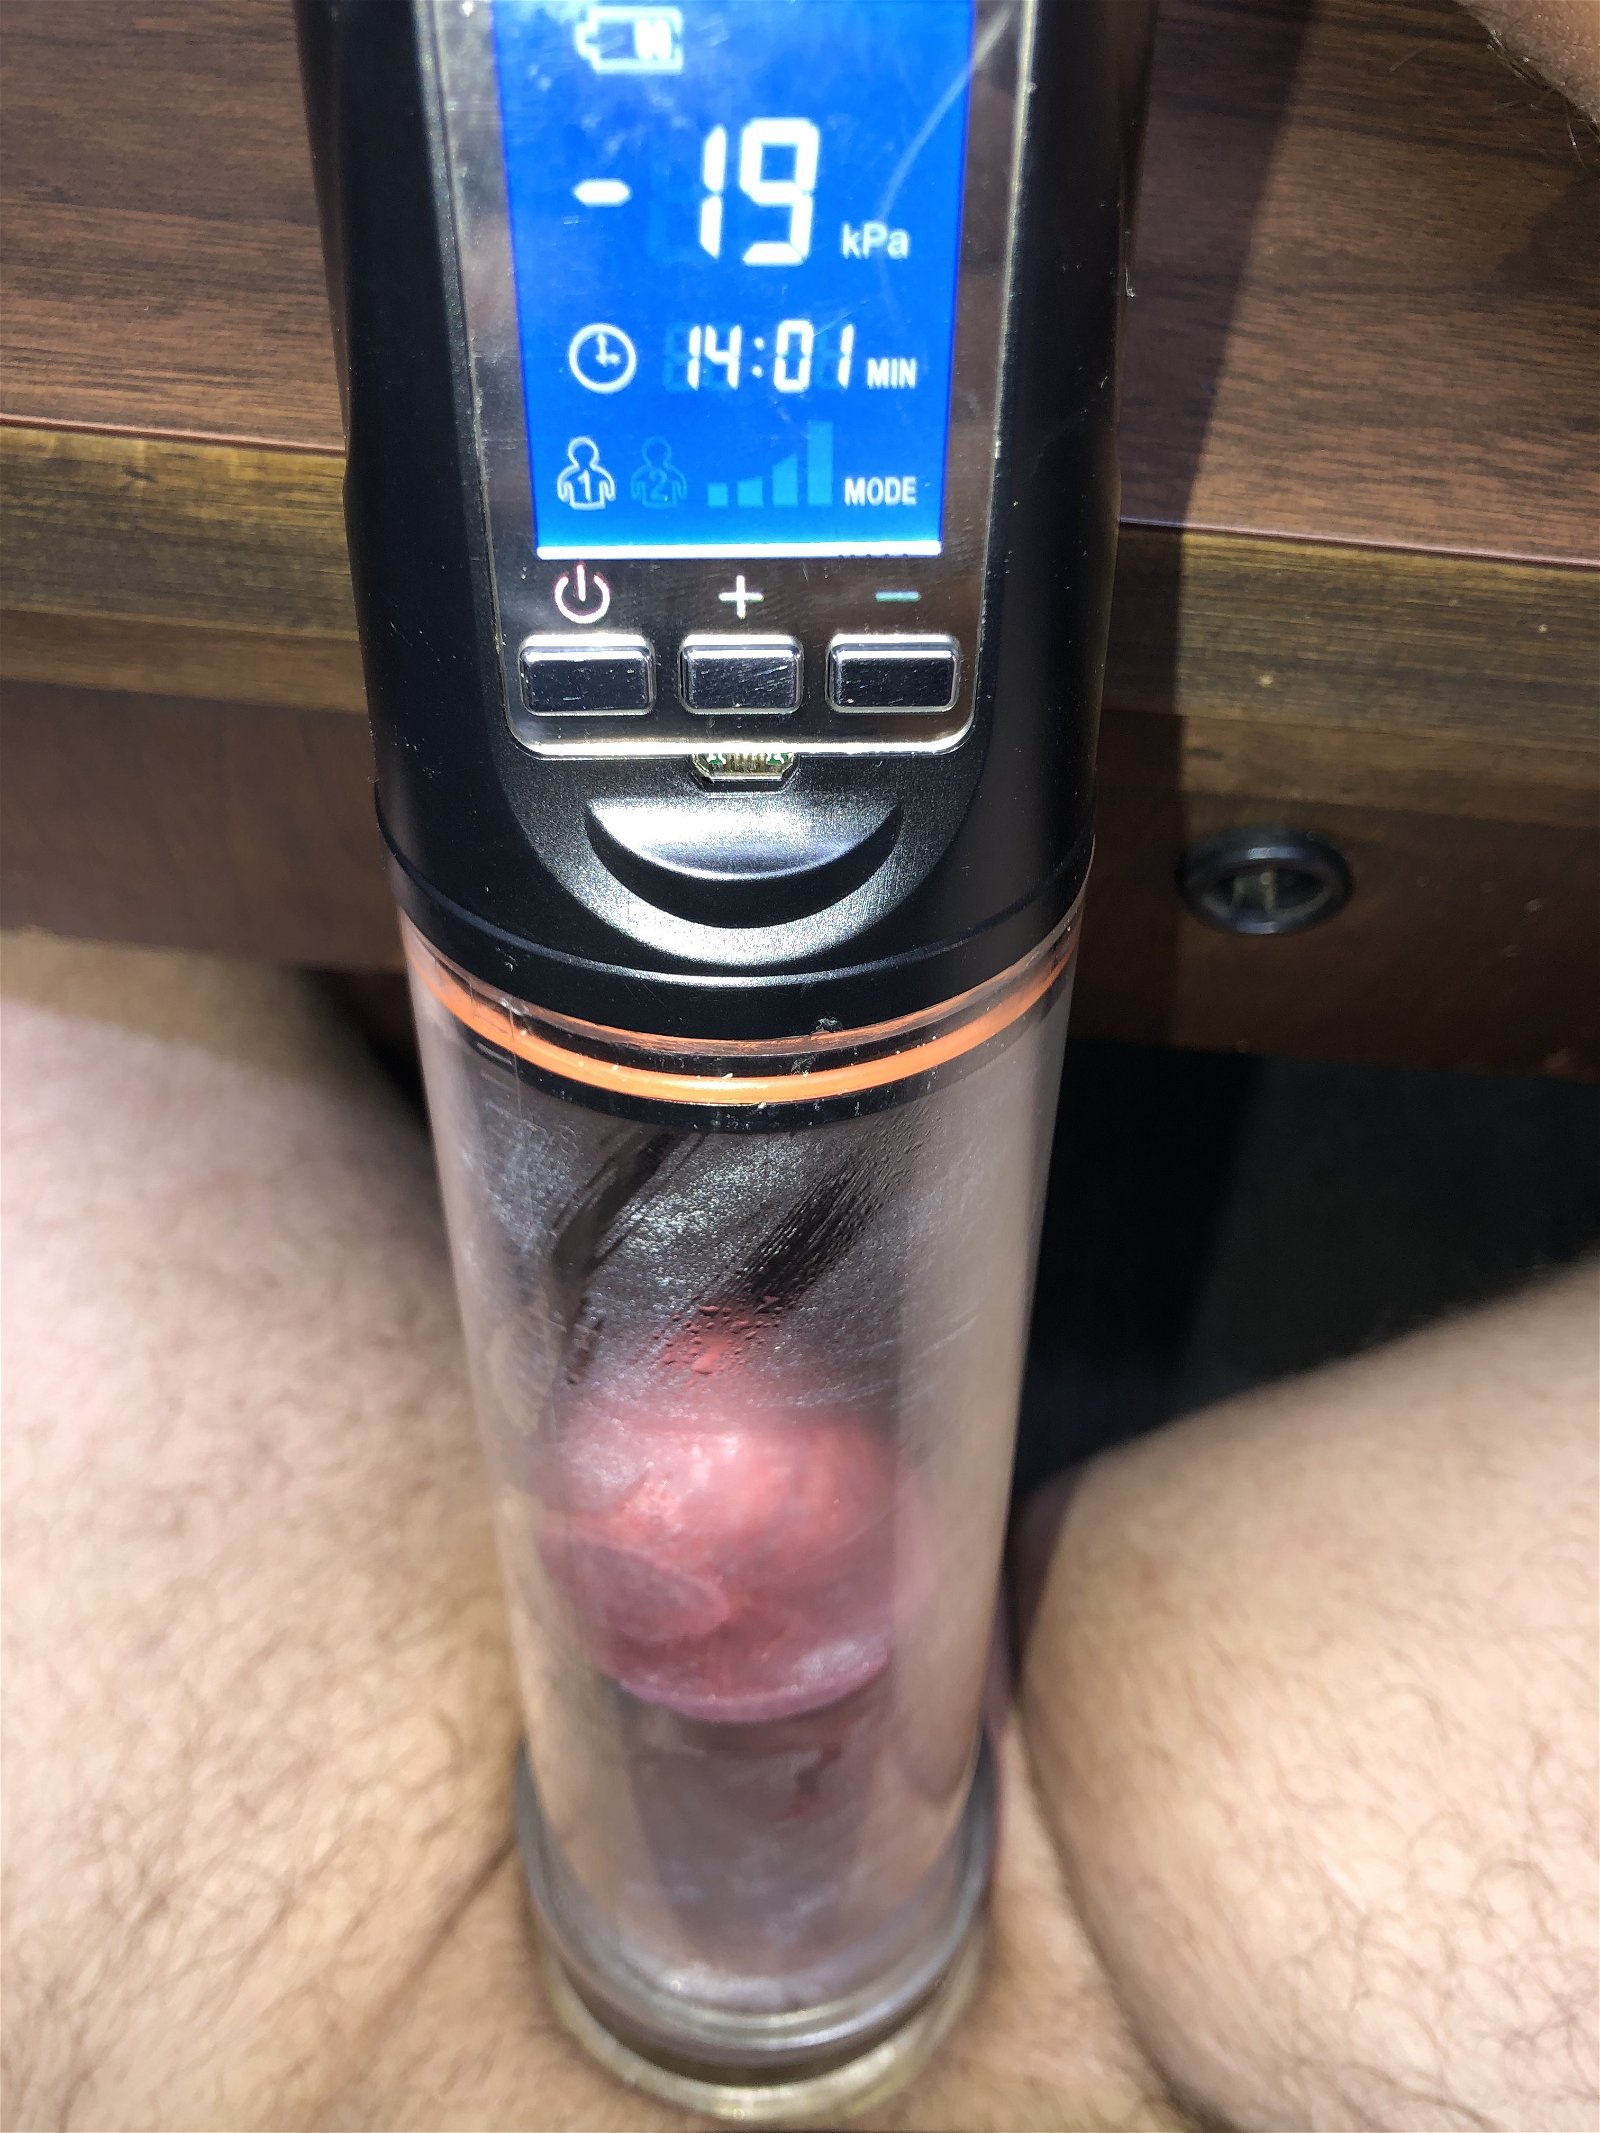 Photo by mancavepumper with the username @mancavepumper,  September 9, 2020 at 4:10 AM. The post is about the topic Penis Pumping and the text says 'Just some penis pumping 

#penispump #cockpump #harddick #penis #cock #pumpeddick'